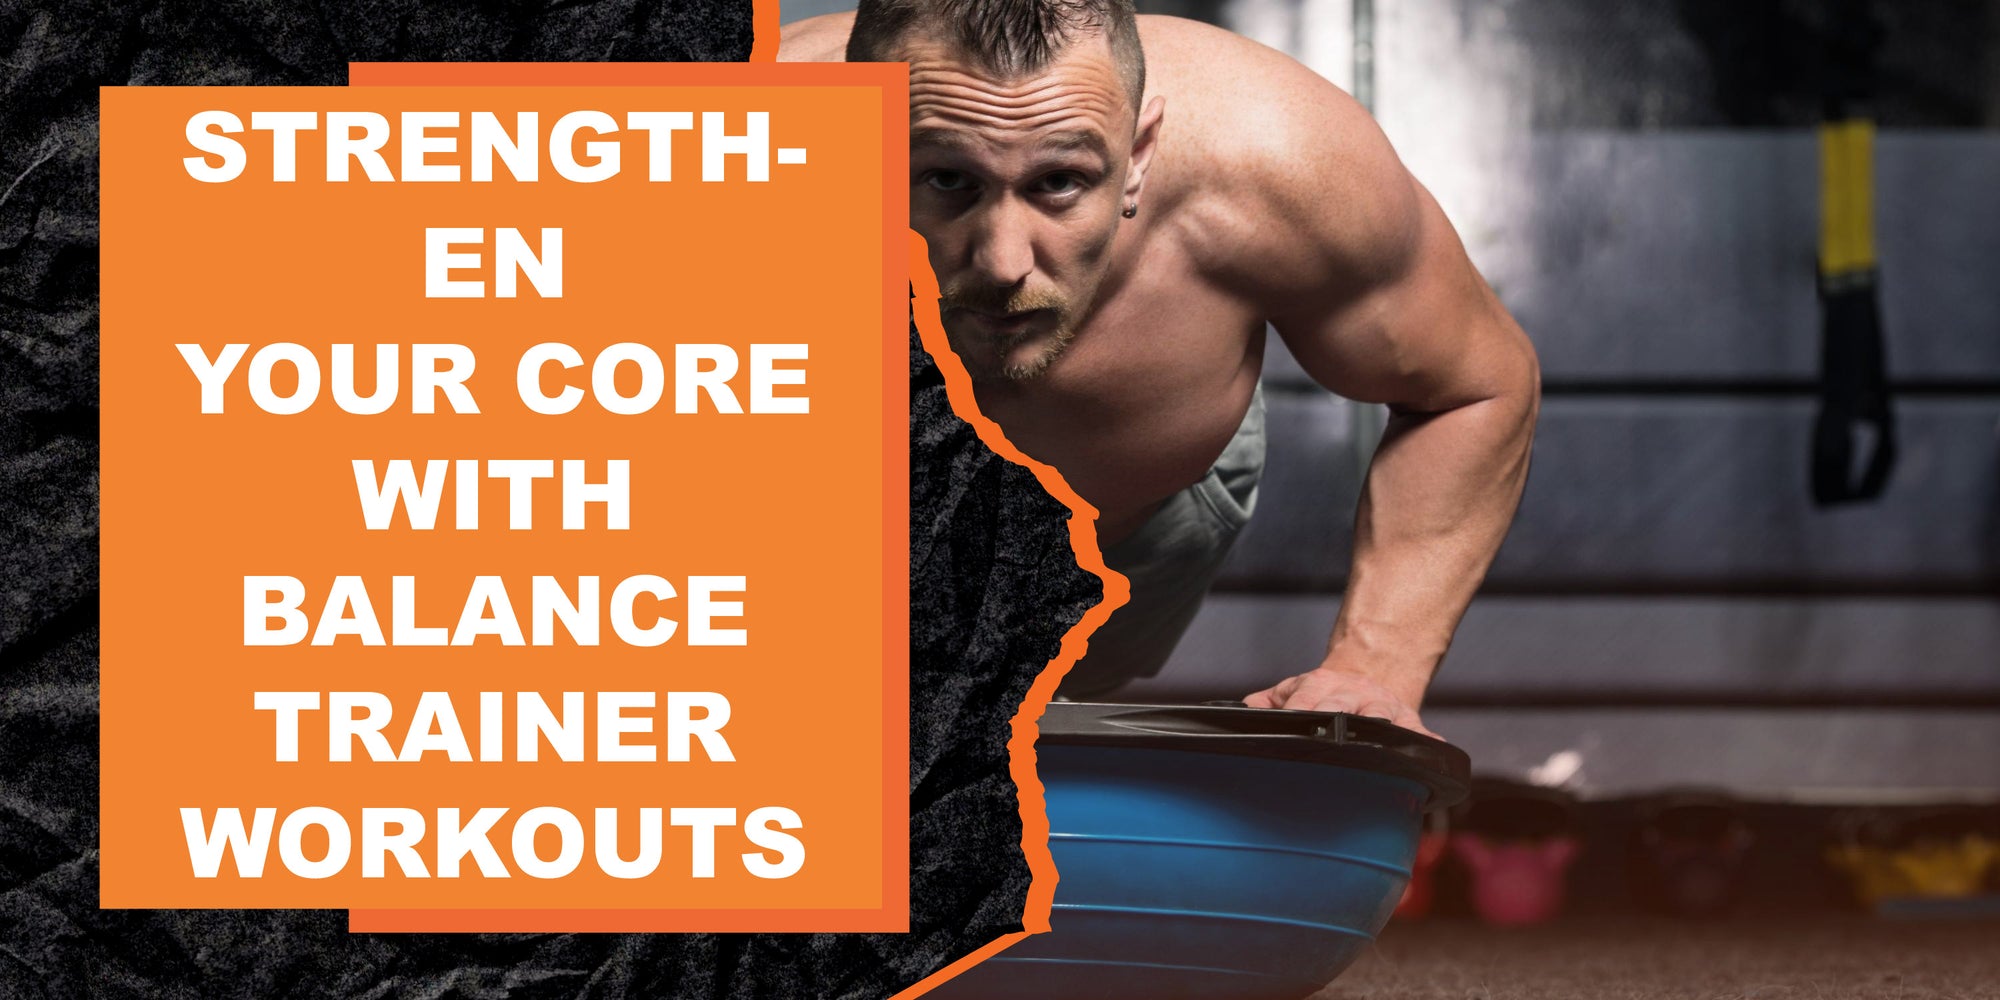 Strengthen Your Core with Balance Trainer Workouts